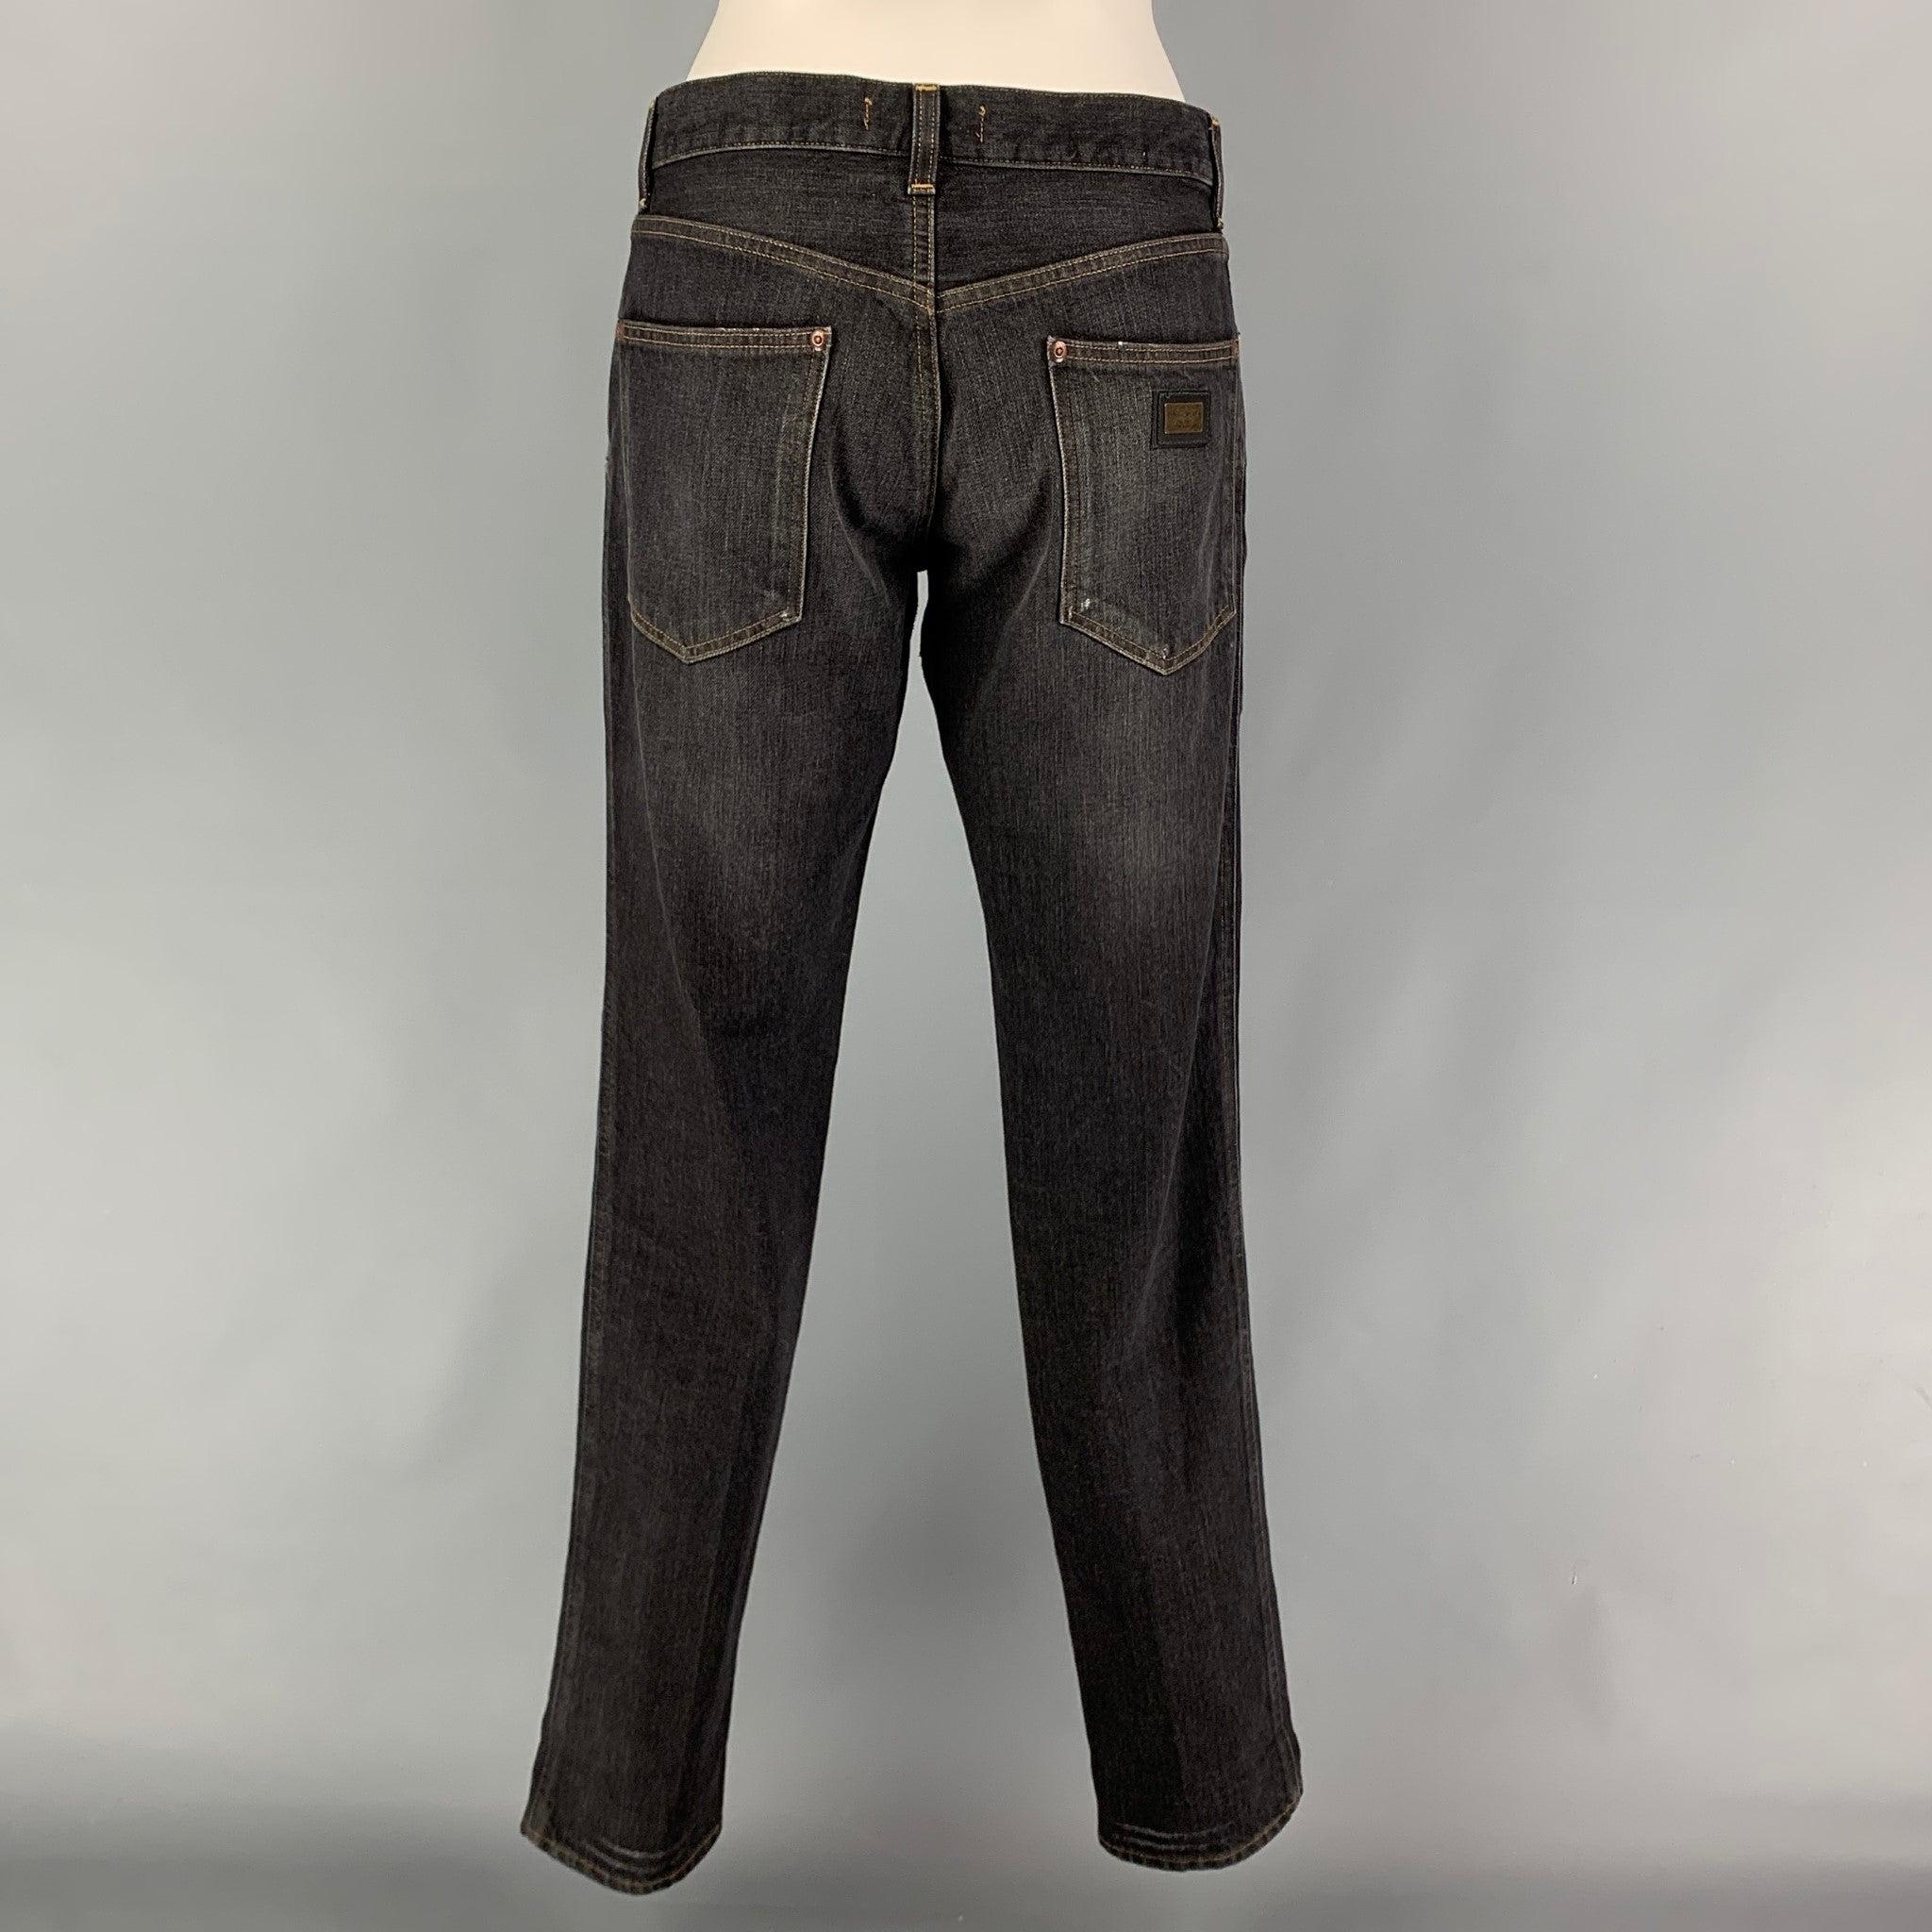 DOLCE & GABBANA jeans comes in a grey distressed cotton denim featuring a straight leg, contrast stitching, back logo emblem, and a zip fly closure. Made in Italy.
Very Good
Pre-Owned Condition. 

Marked:   46 

Measurements: 
  Waist: 34 inches 